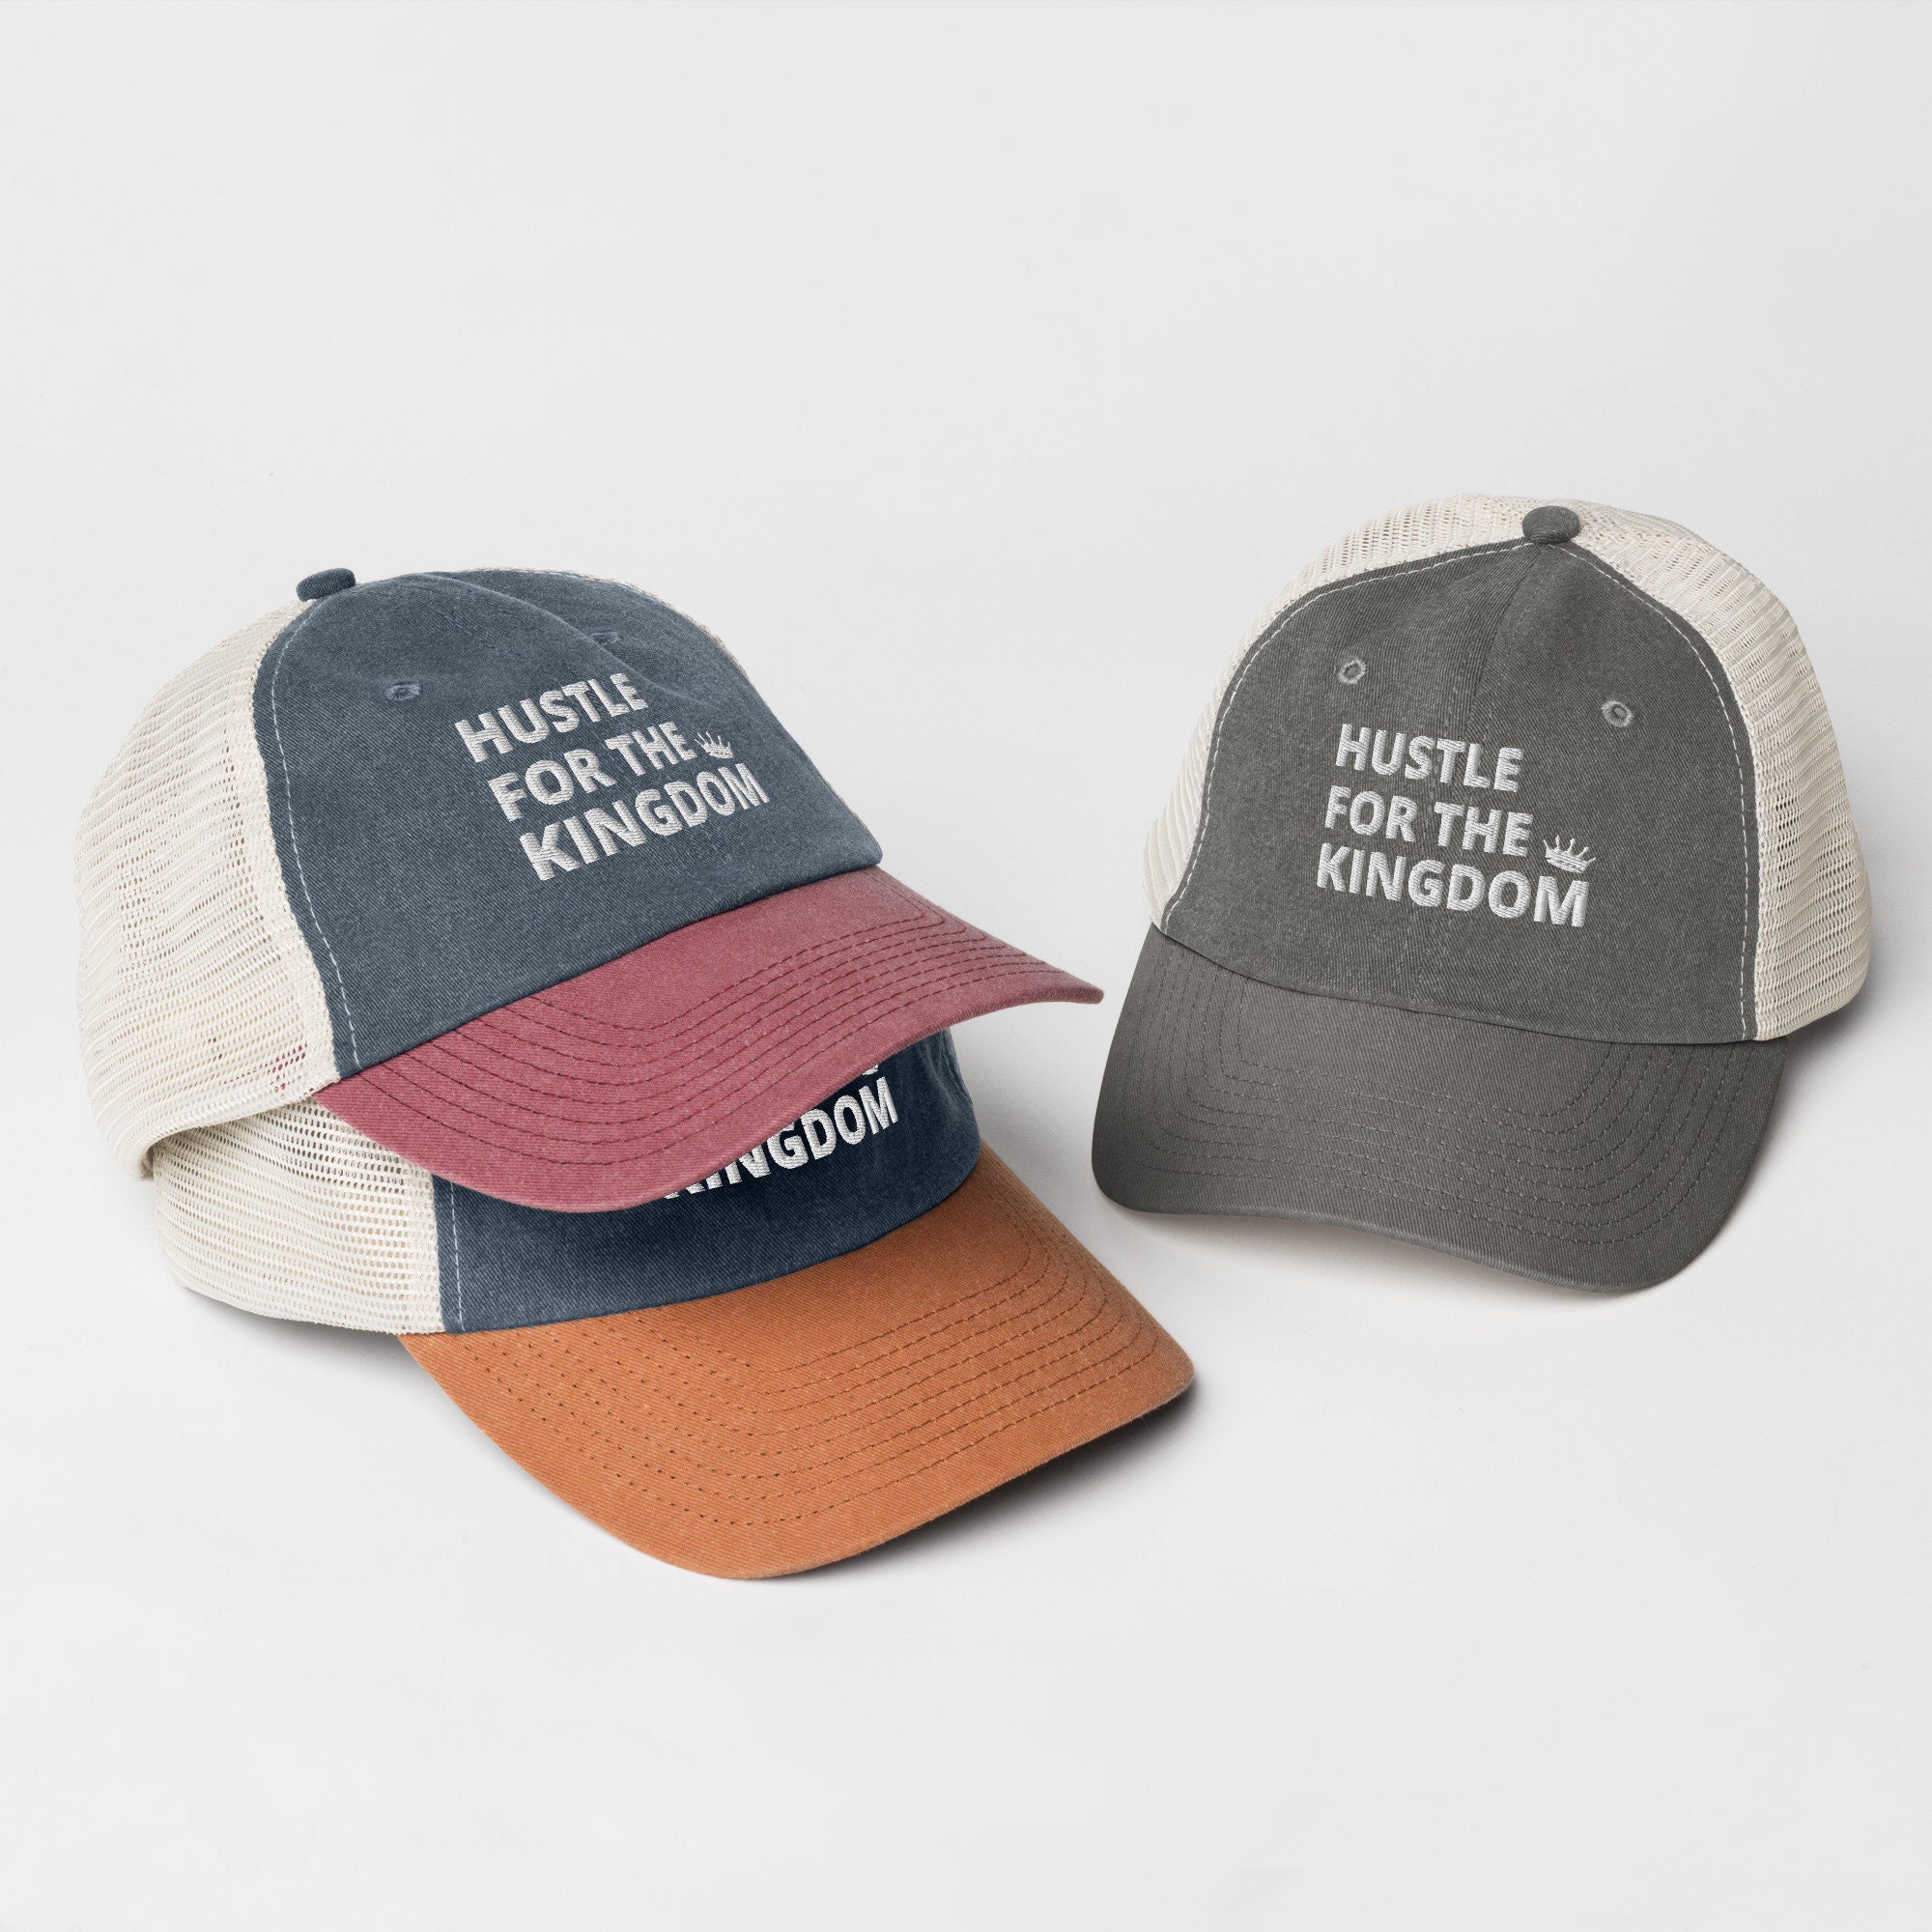 Wholesale Bulk Your Custom Text/Design EMBROIDERED Dad Hat Cap Pigment Dyed Baseball Cap Custom Embroidery New Colors To Choose From! Accessoires Hoeden & petten Honkbal- & truckerspetten 